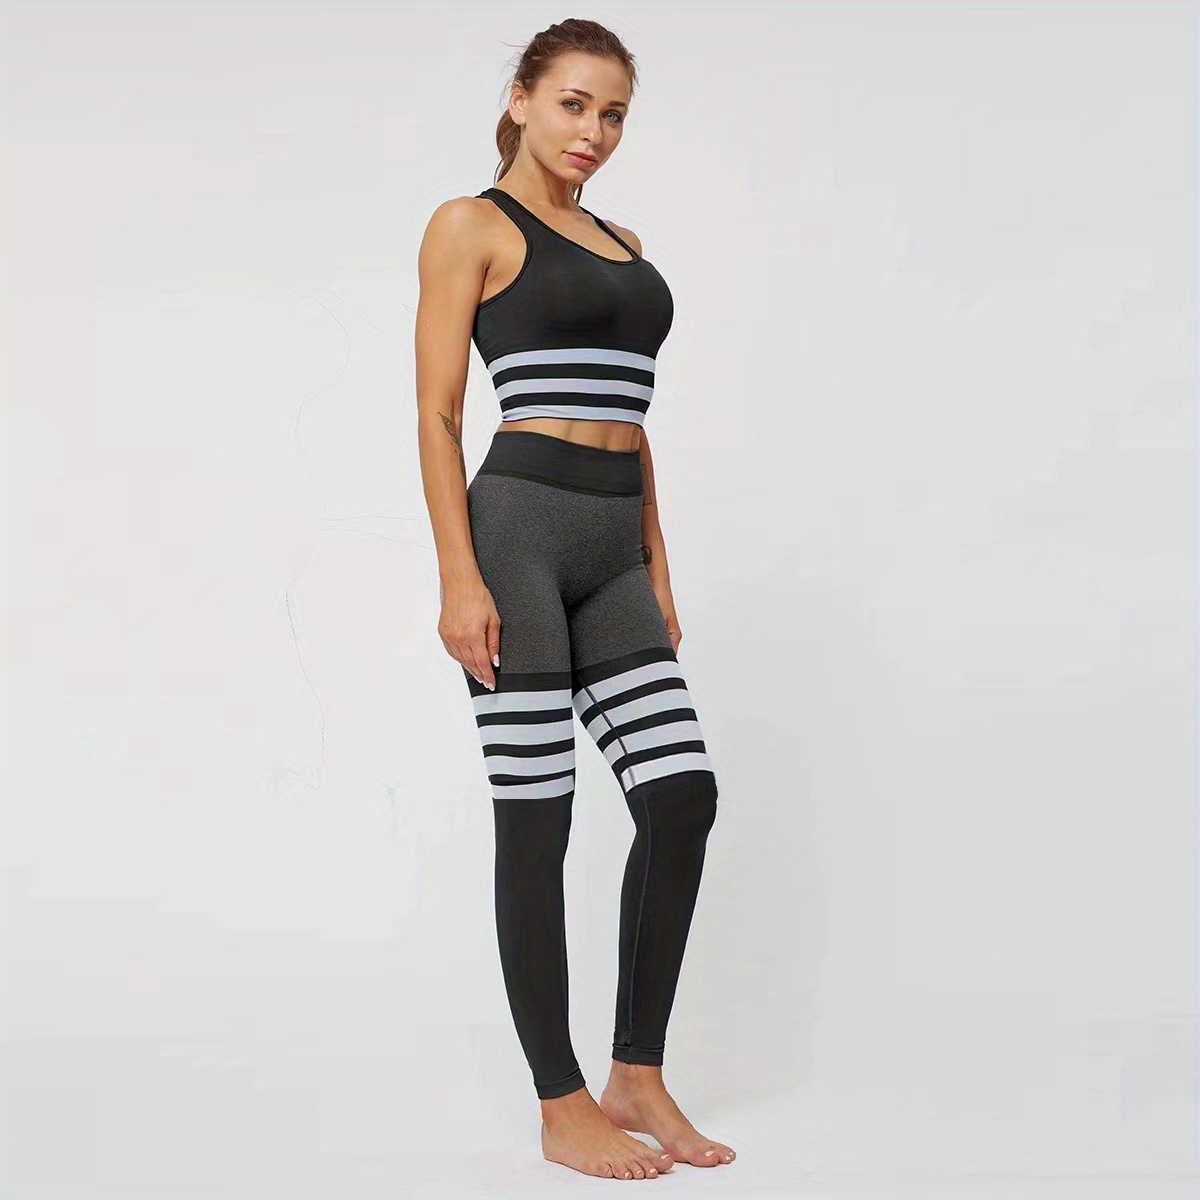 Black and White Vertical Striped Leggings, Women's Yoga Gym Athletic  Workout Active Gothic Printed Pants Tights